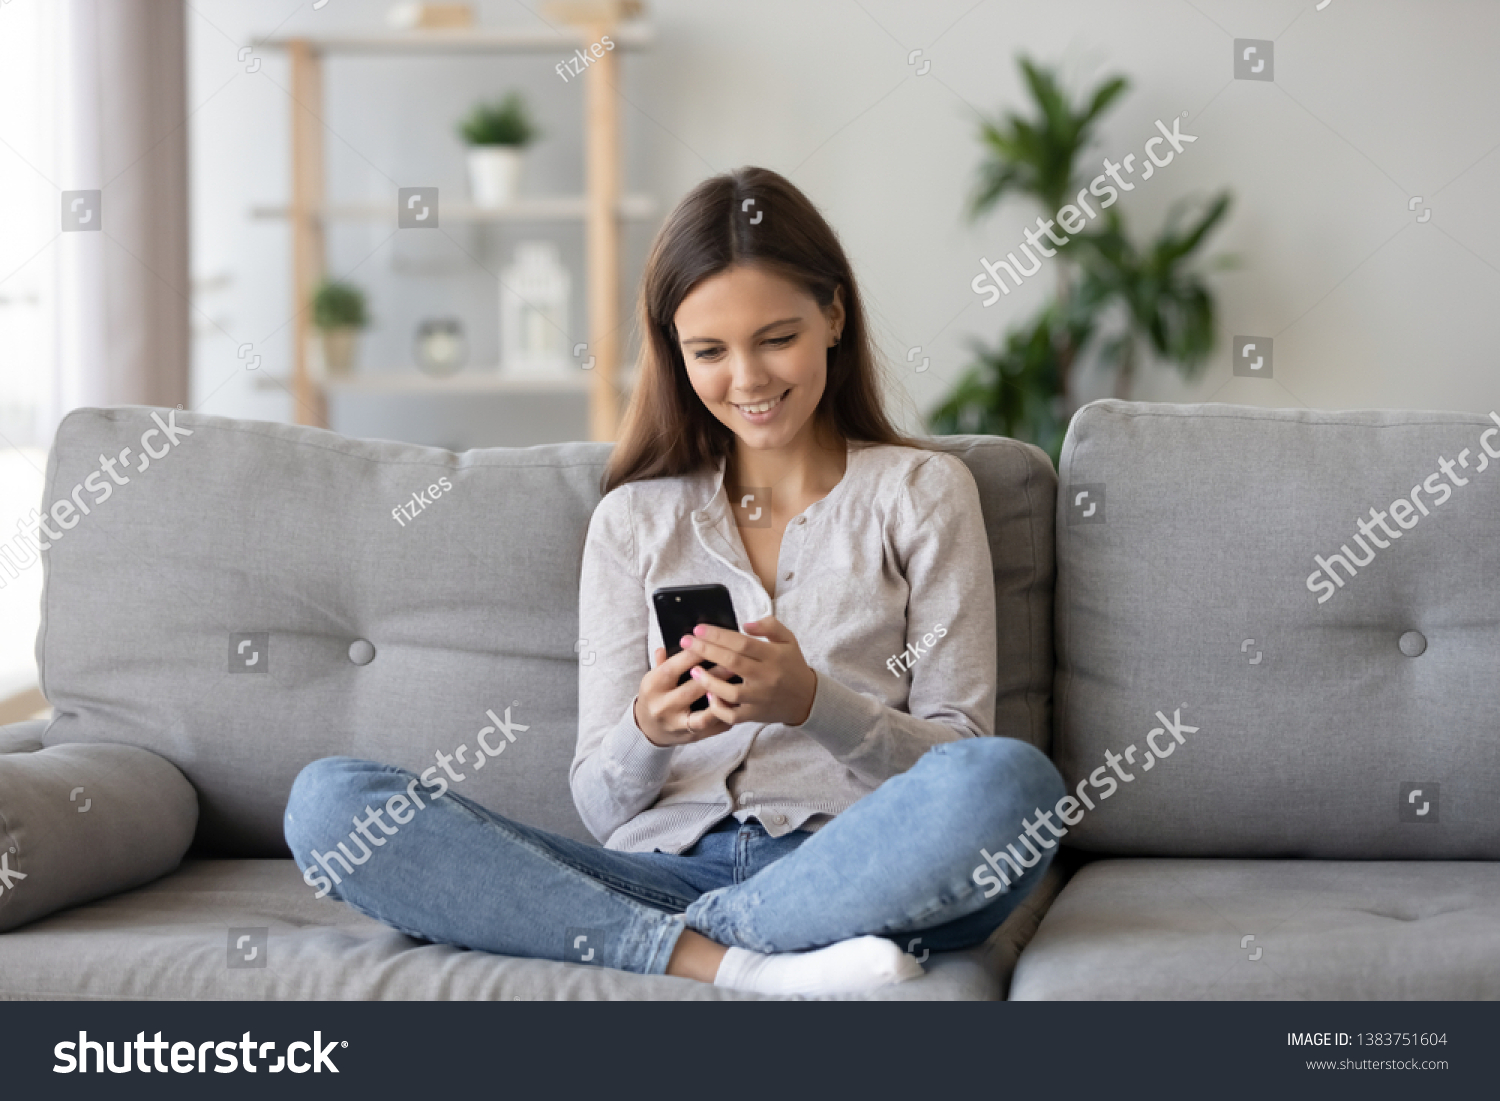 Smiling teenager girl relax sit on sofa at home using cellphone texting chatting with friend, happy young woman on couch hold smartphone shop online or check mobile application or social media #1383751604